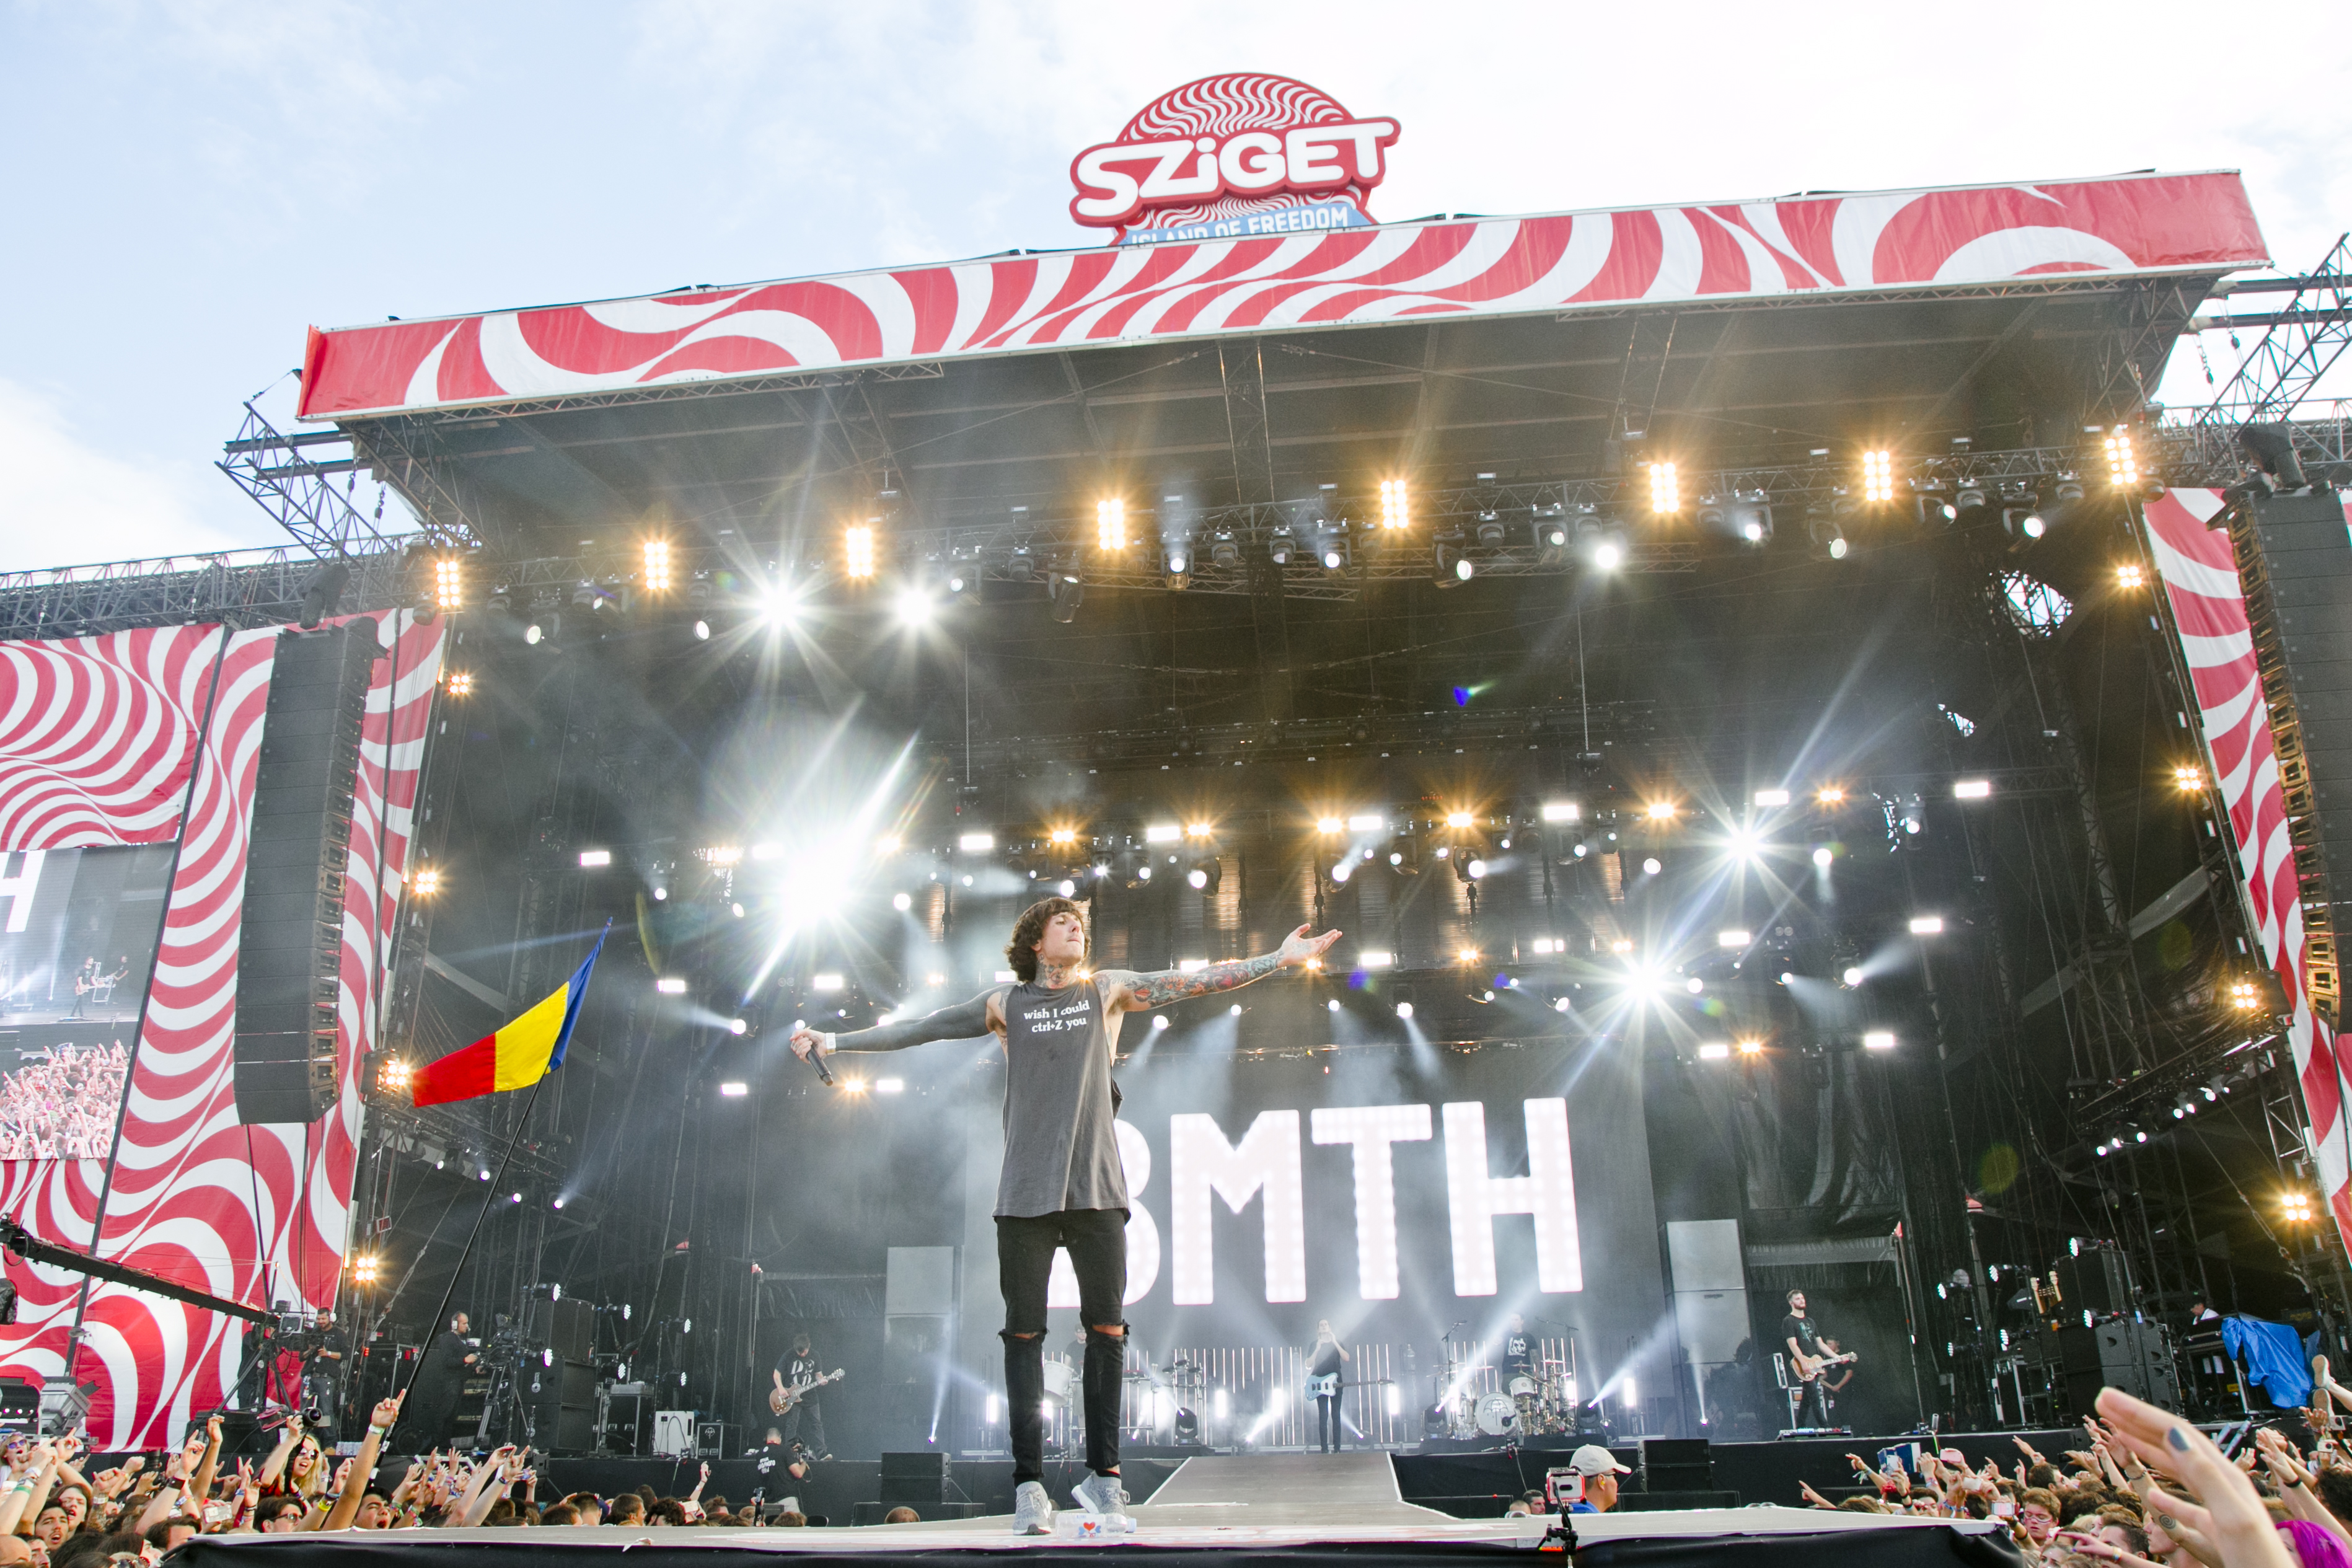 Bring Me The Horizon at Sziget Festival, Budapest, Hungary - 13 August 2016